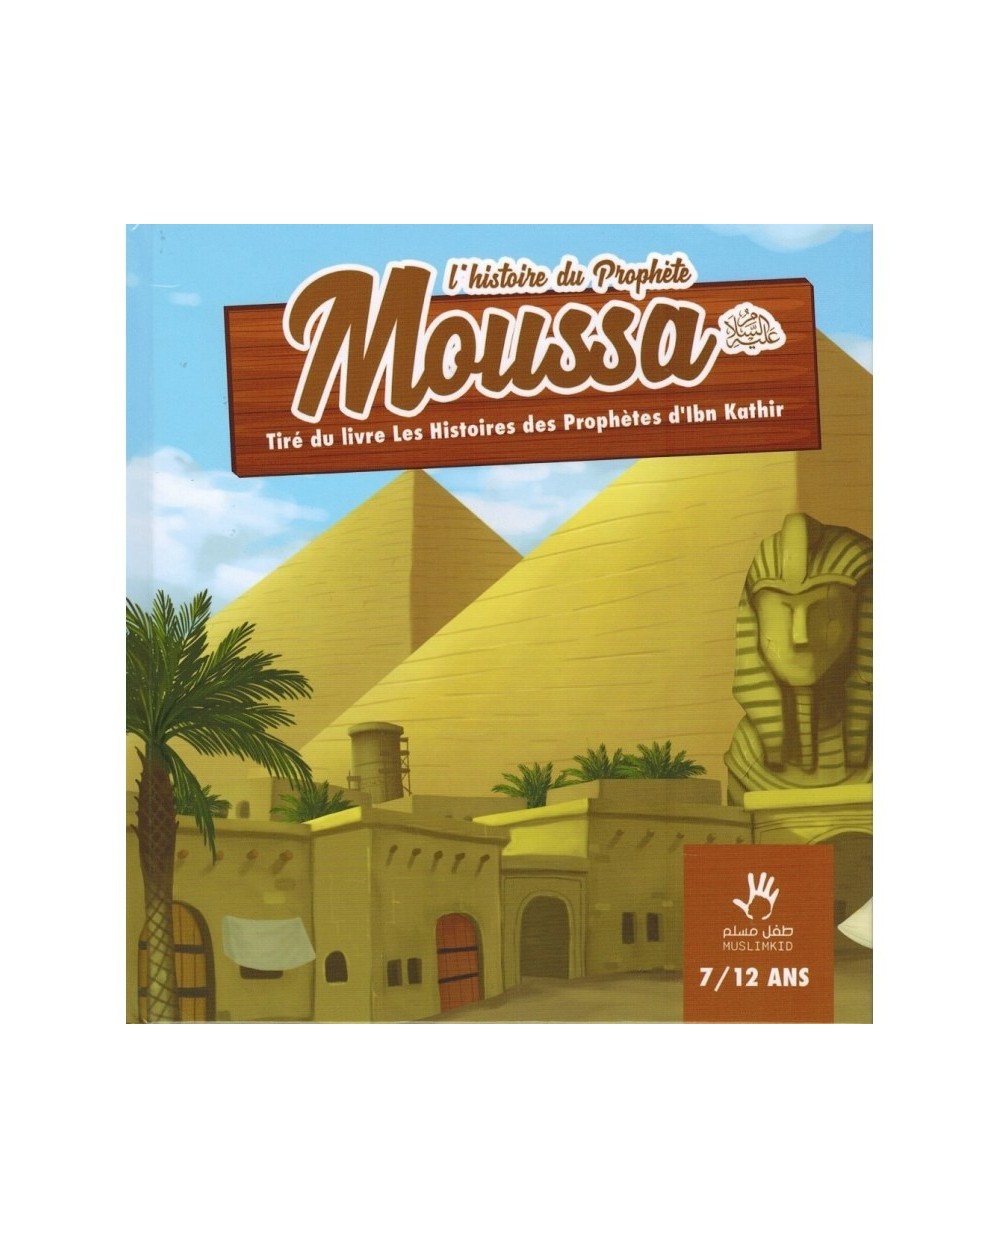 THE HISTORY OF THE PROPHET MOUSSA (7/12 YEARS) - MUSLIMKID